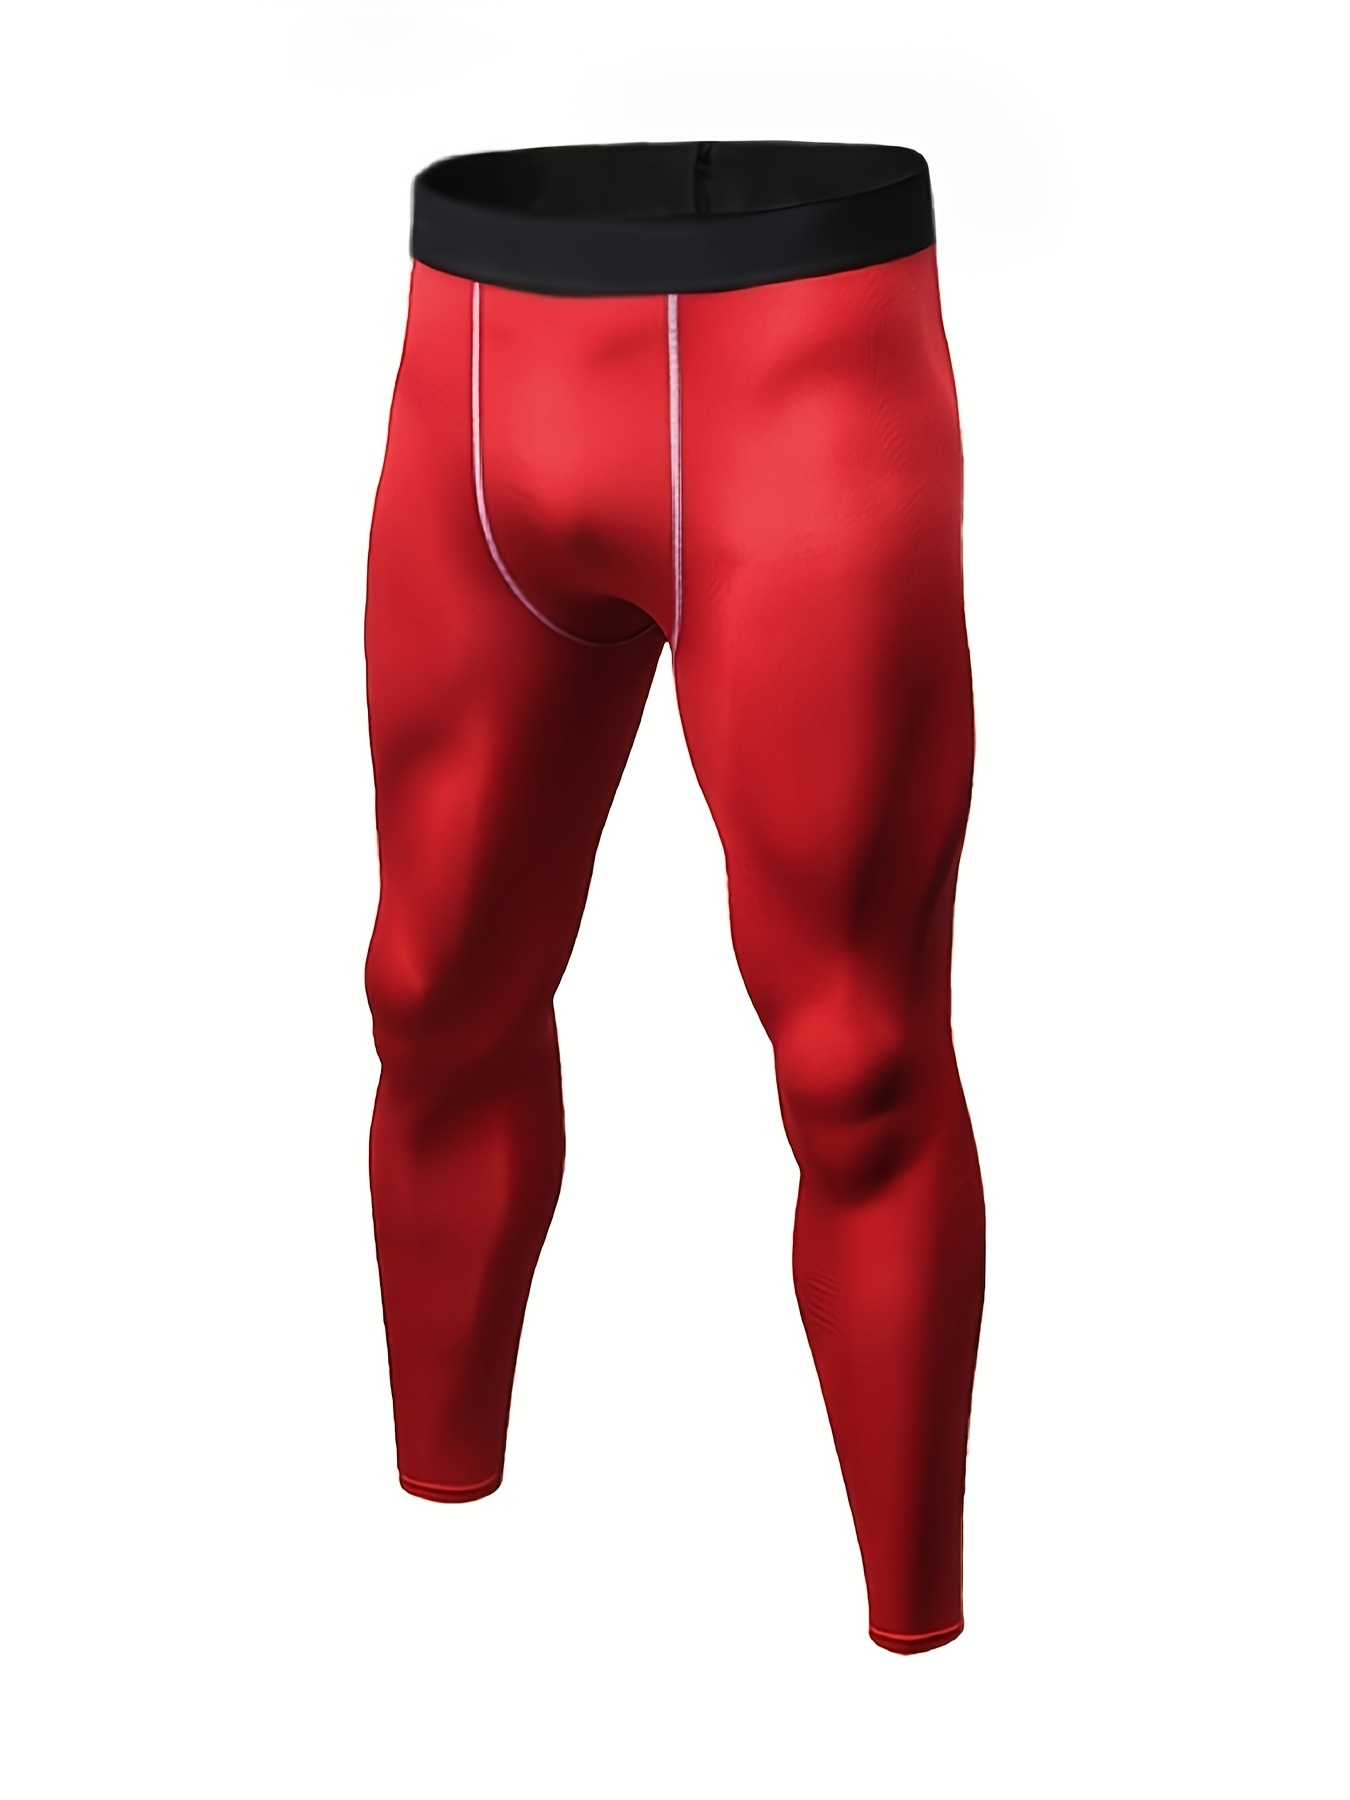 Big Size Men's Compression Running Pants Sportswear Fitness Gym